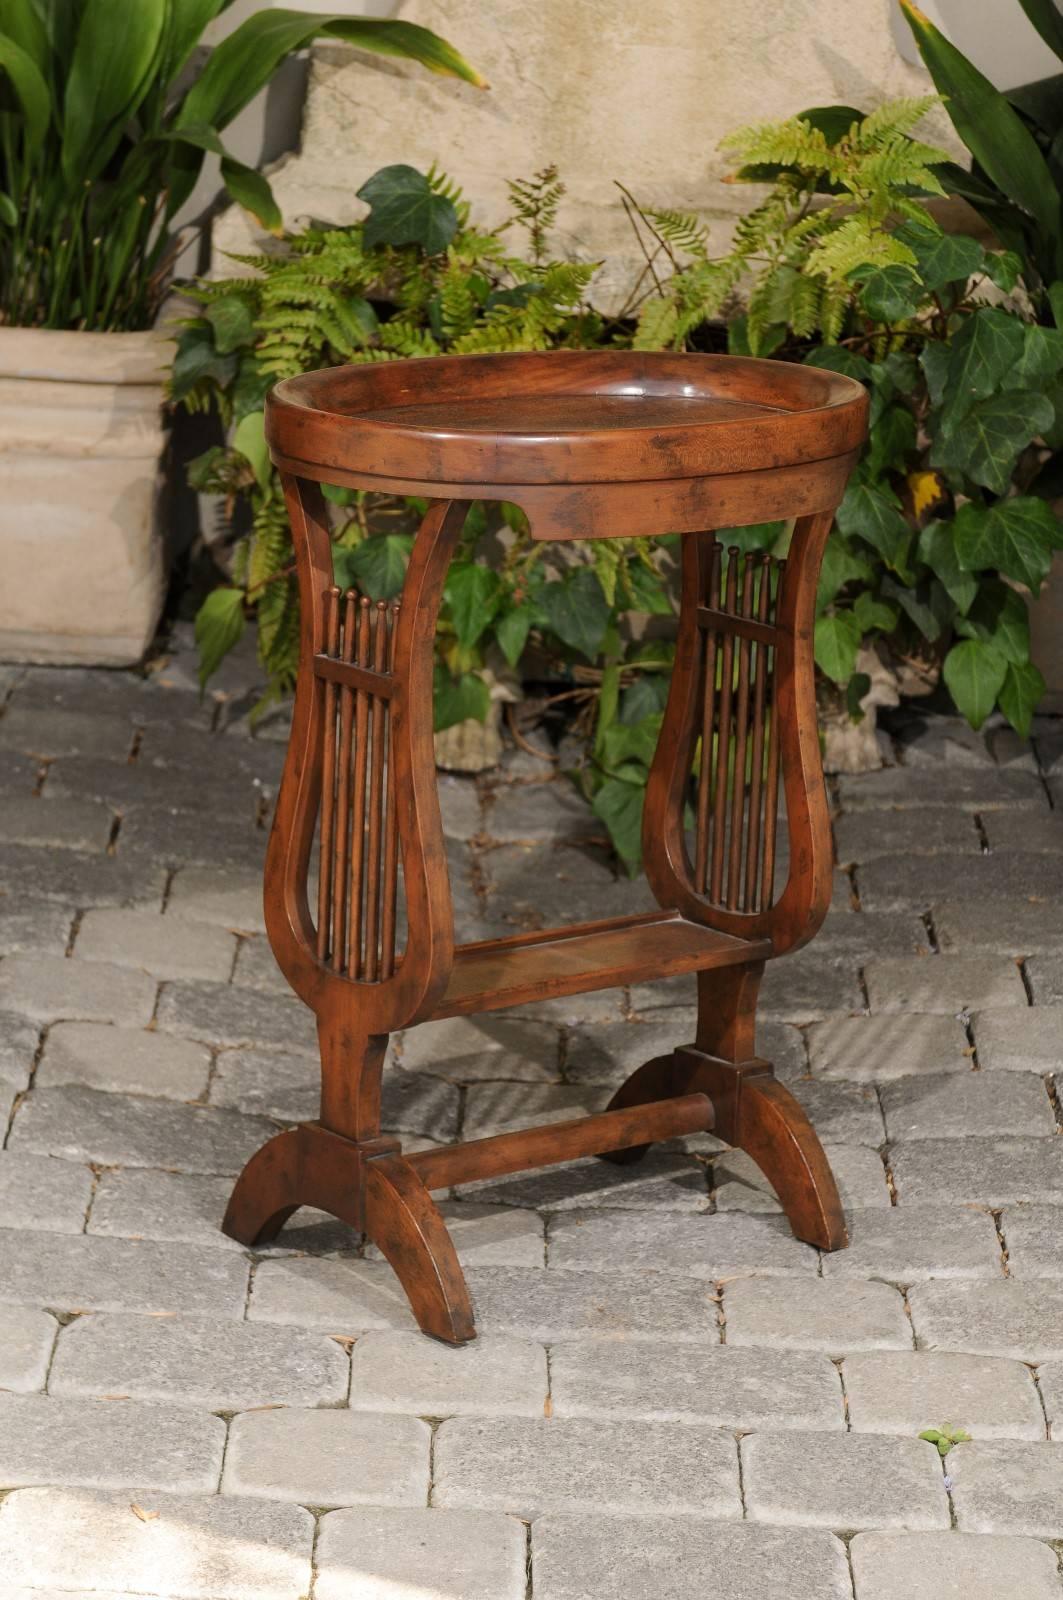 An Italian vintage walnut side table with oval tray top and lyre-shaped legs from the mid-20th century. This Italian side table features an oval tray top, supported by two elegantly carved lyre-shaped legs. Playing the role of a stretcher, a narrow